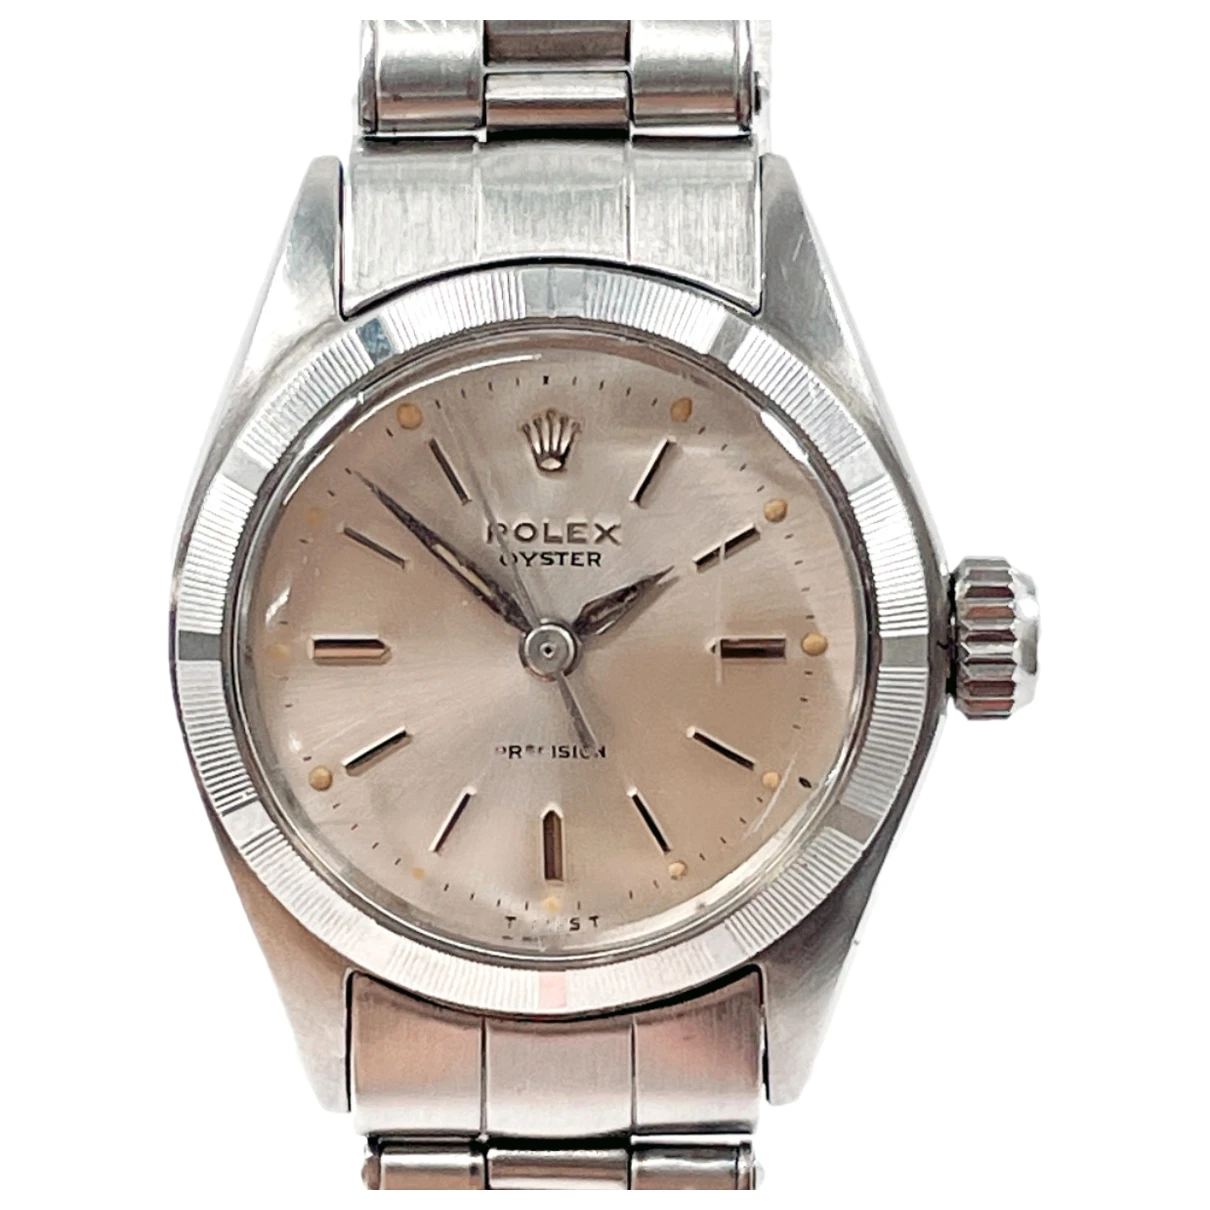 Pre-owned Rolex Watch In Silver